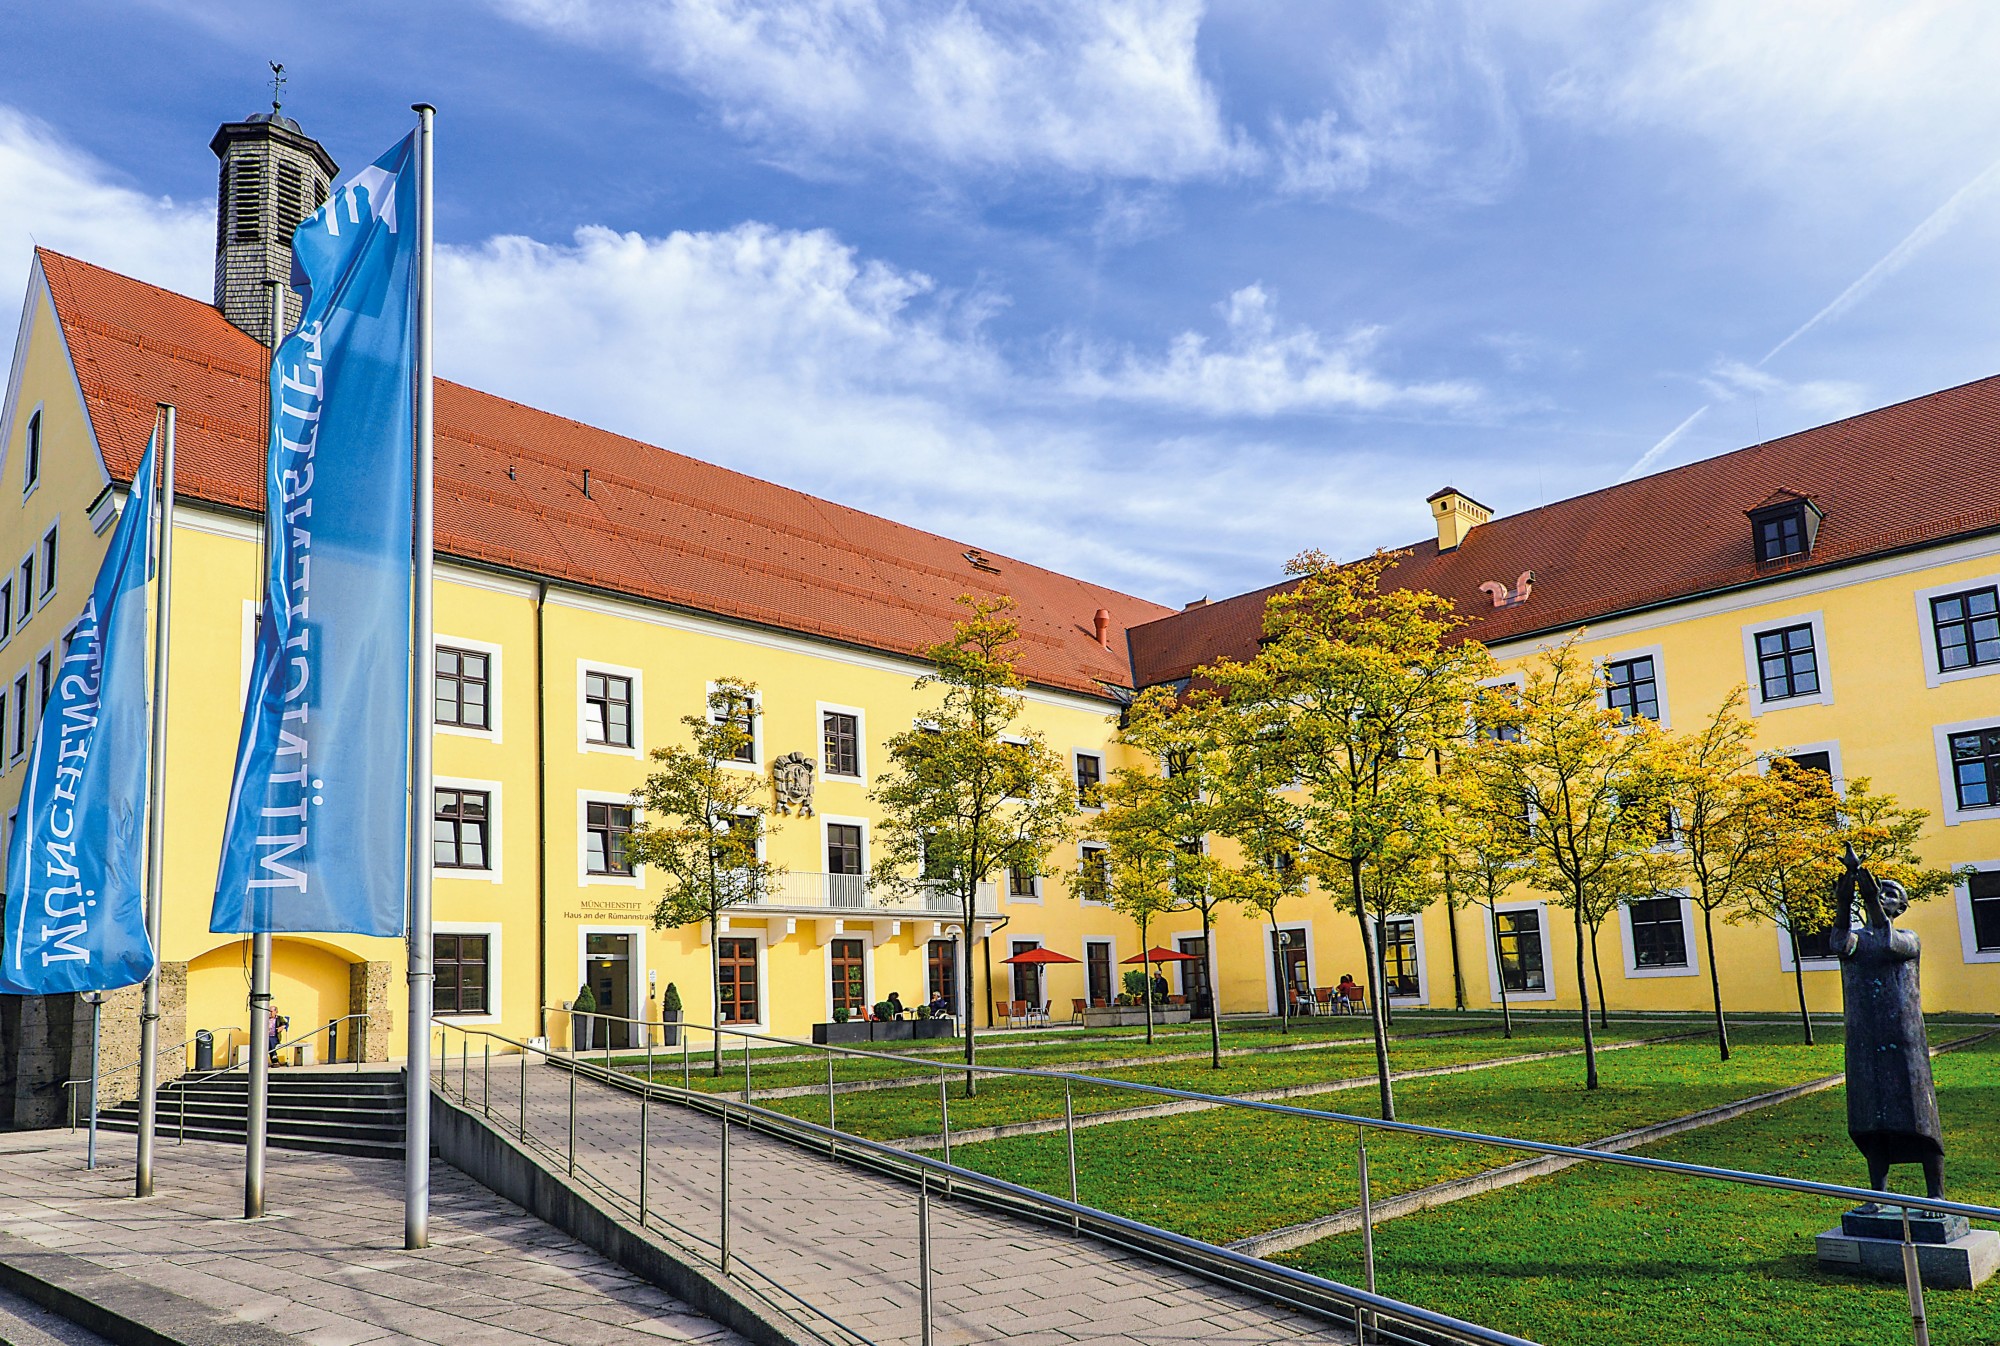 Apelona Wins TFM Contract for Munich Care Homes